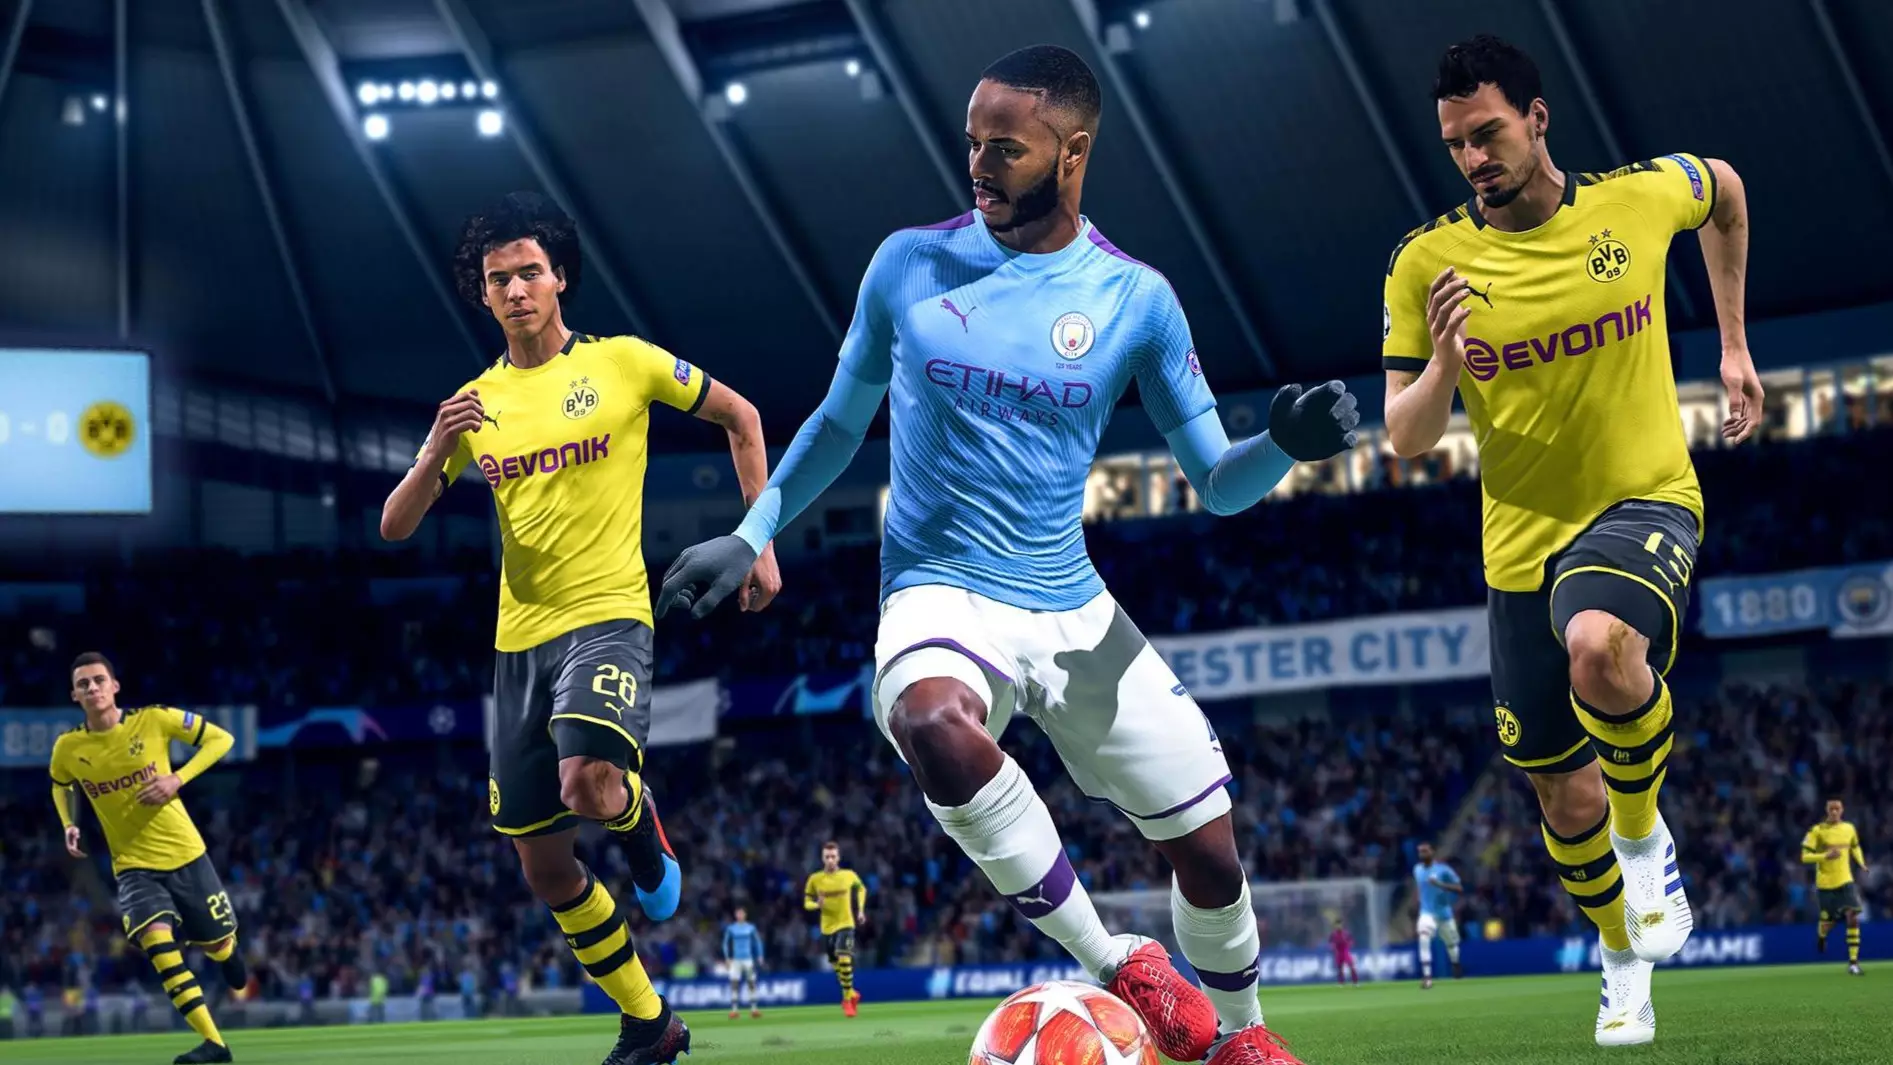 The Official FIFA 20 player ratings are here.